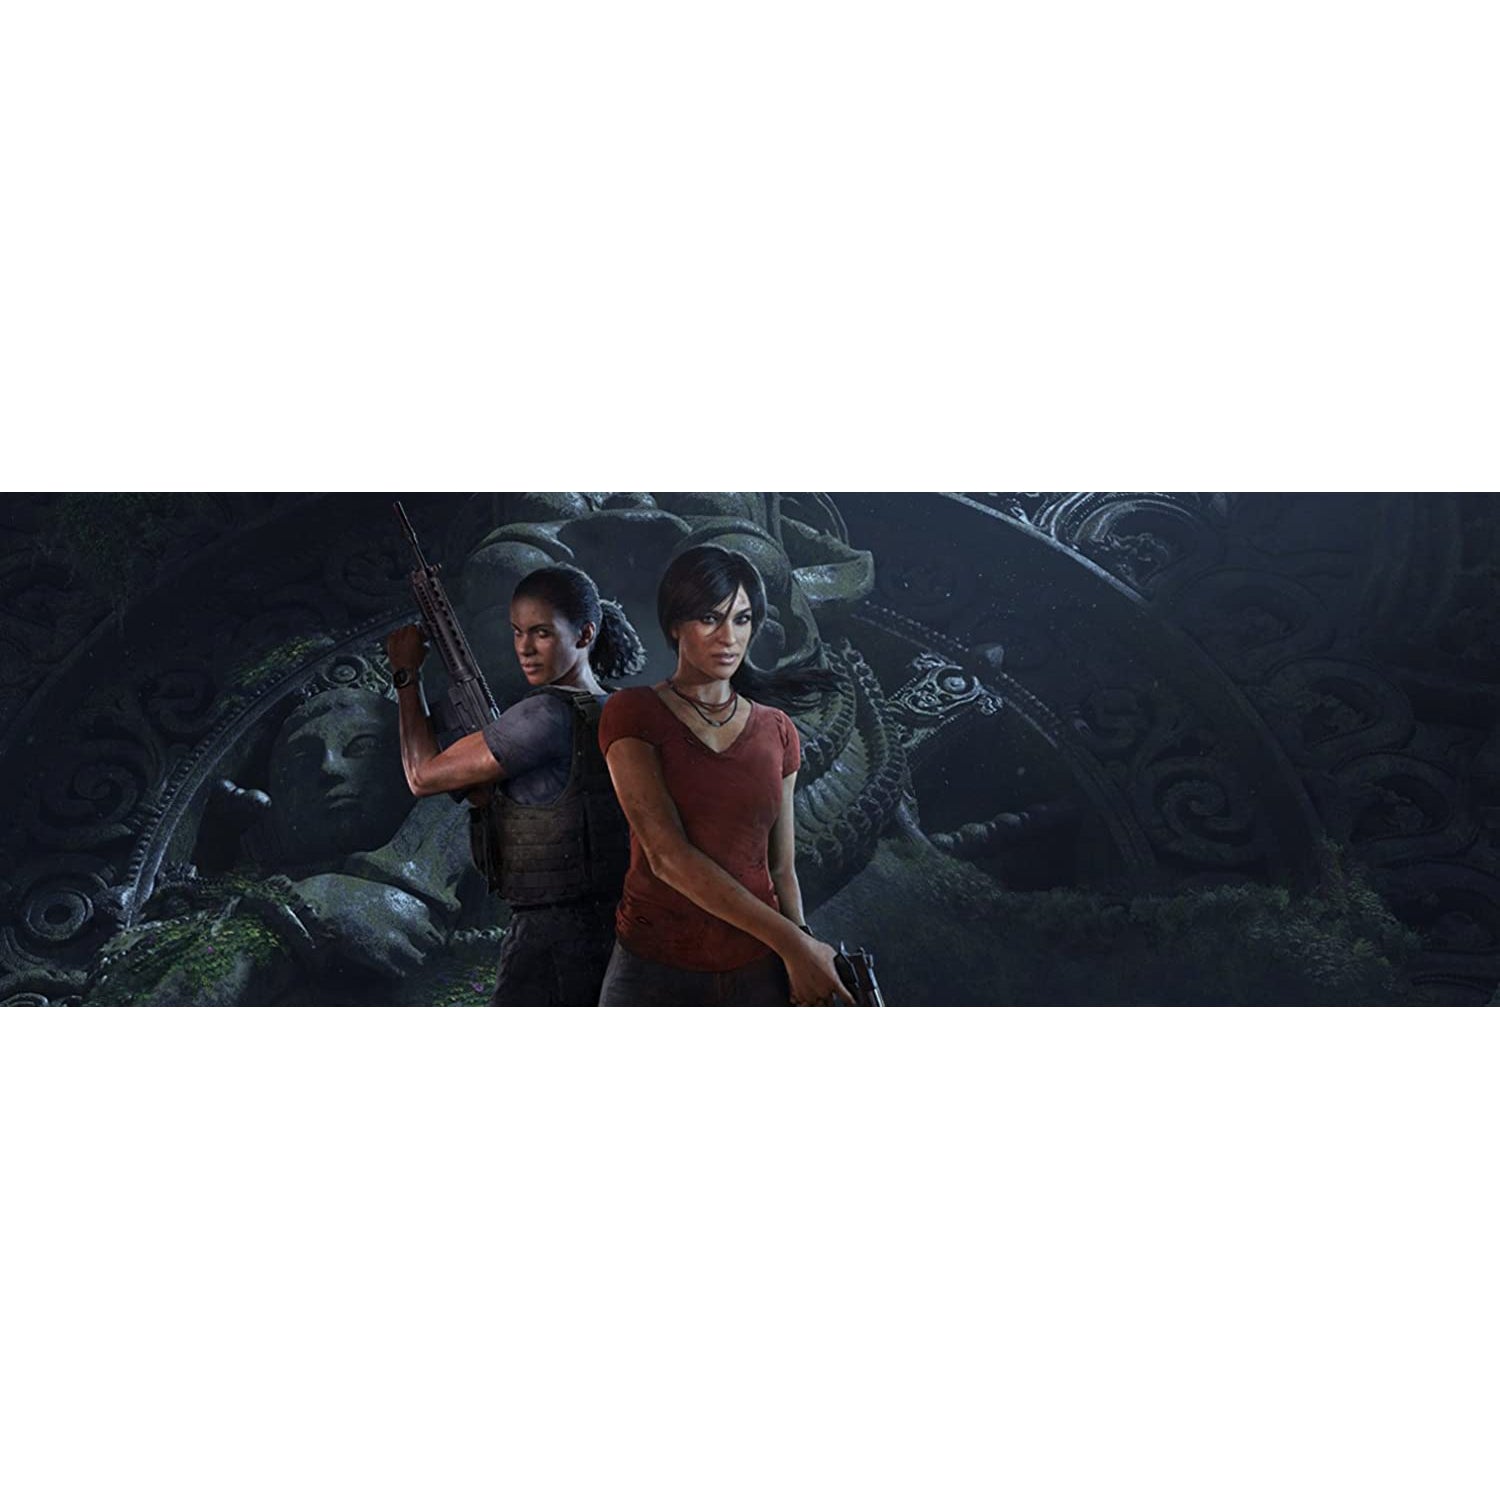 Sony Uncharted: The Lost Legacy (PS4)